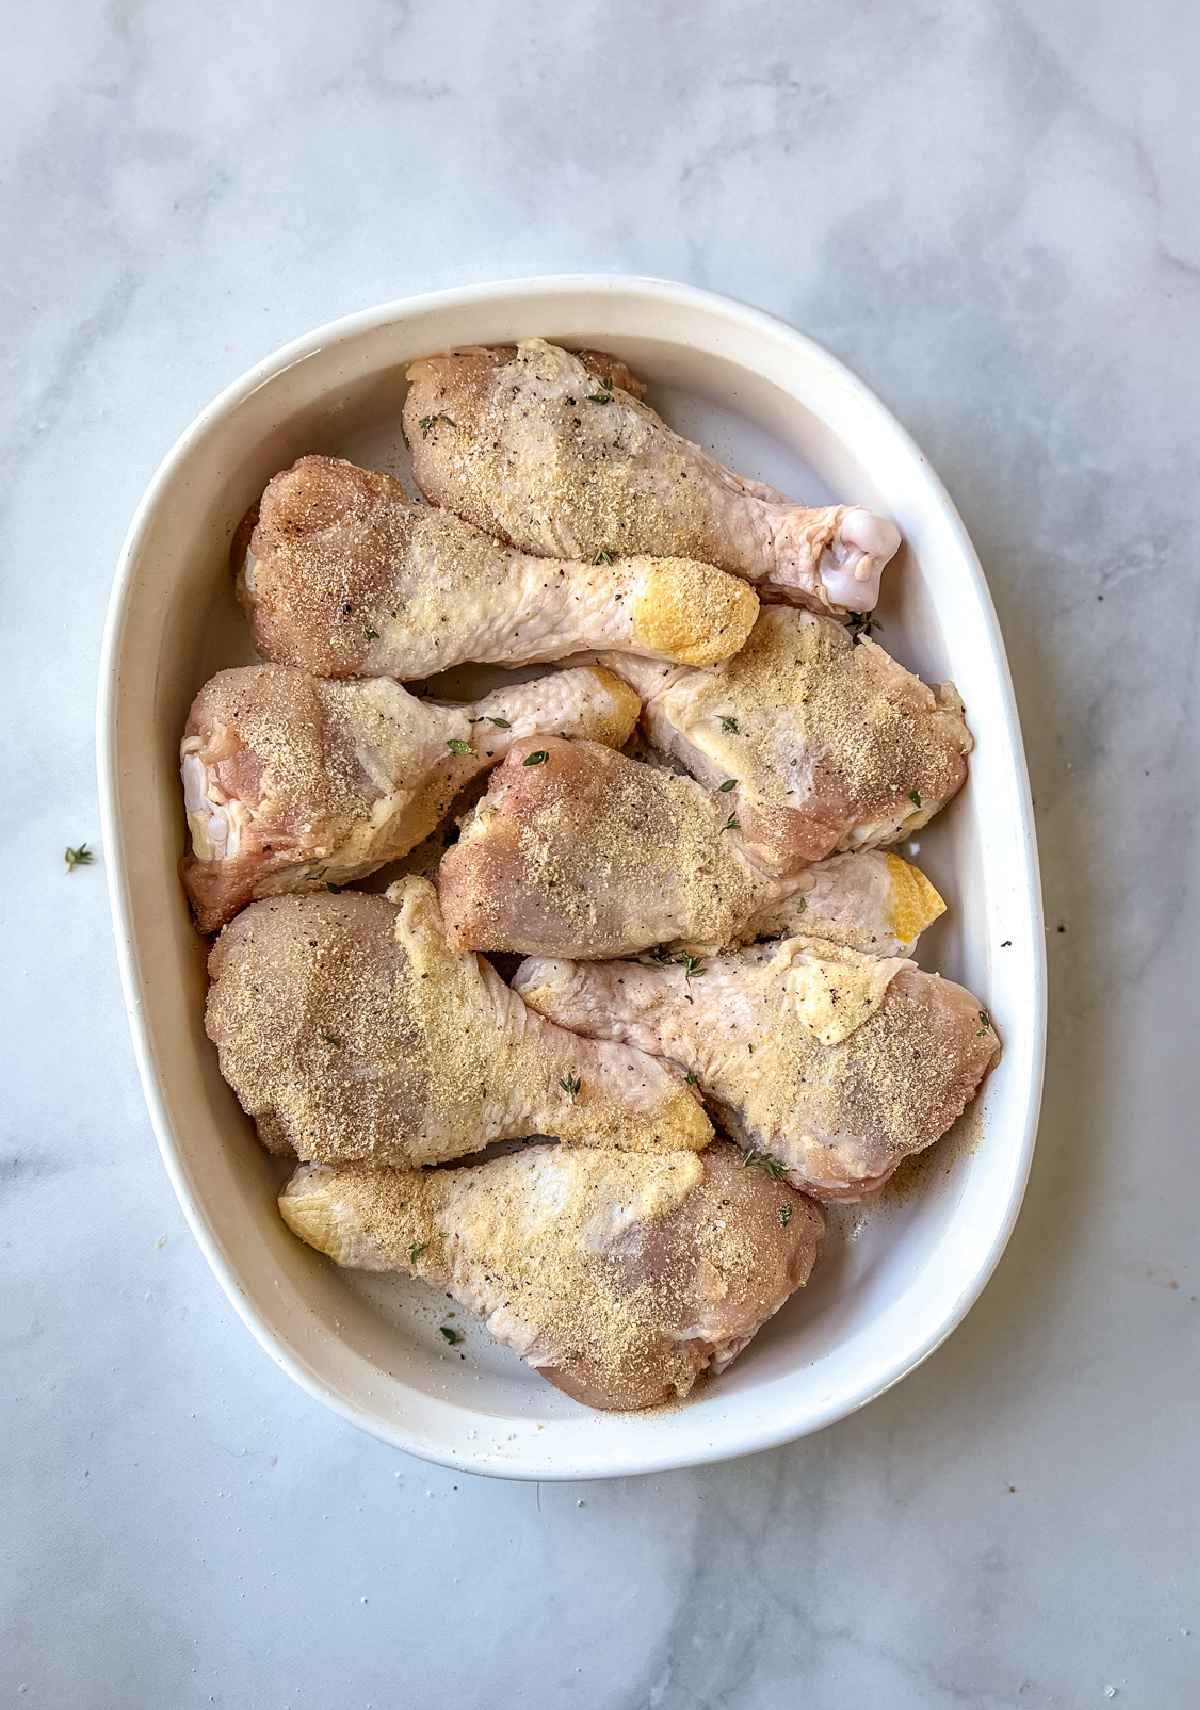 Uncooked and seasoned chicken drumsticks in a white dish